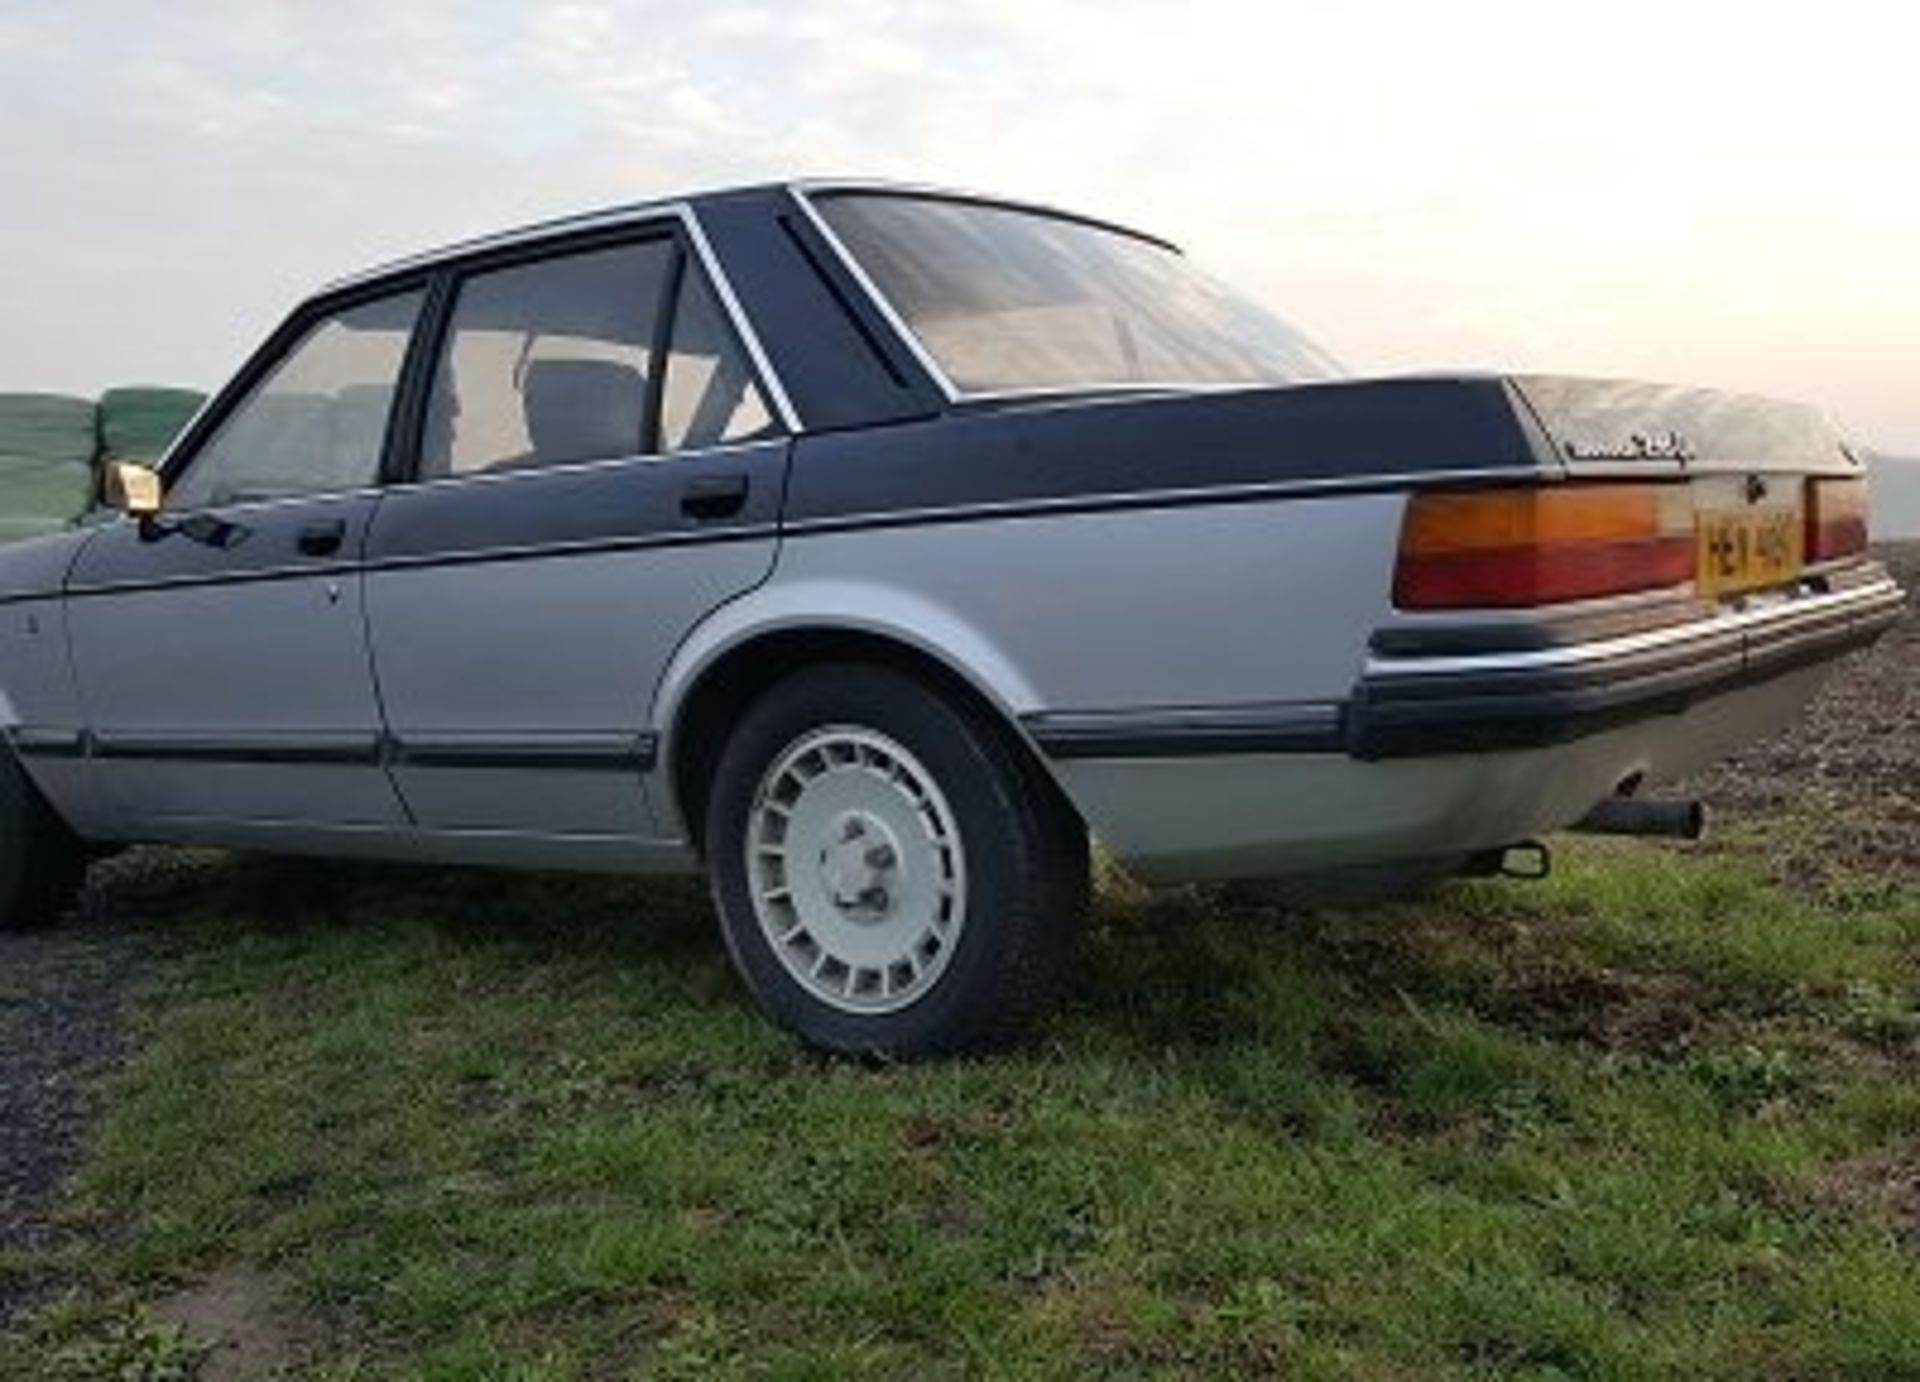 Ford Granada 2.8 Ghia “Sapphire” 1979 - We are pleased to say that the vendor of this rare of rare - Image 3 of 13